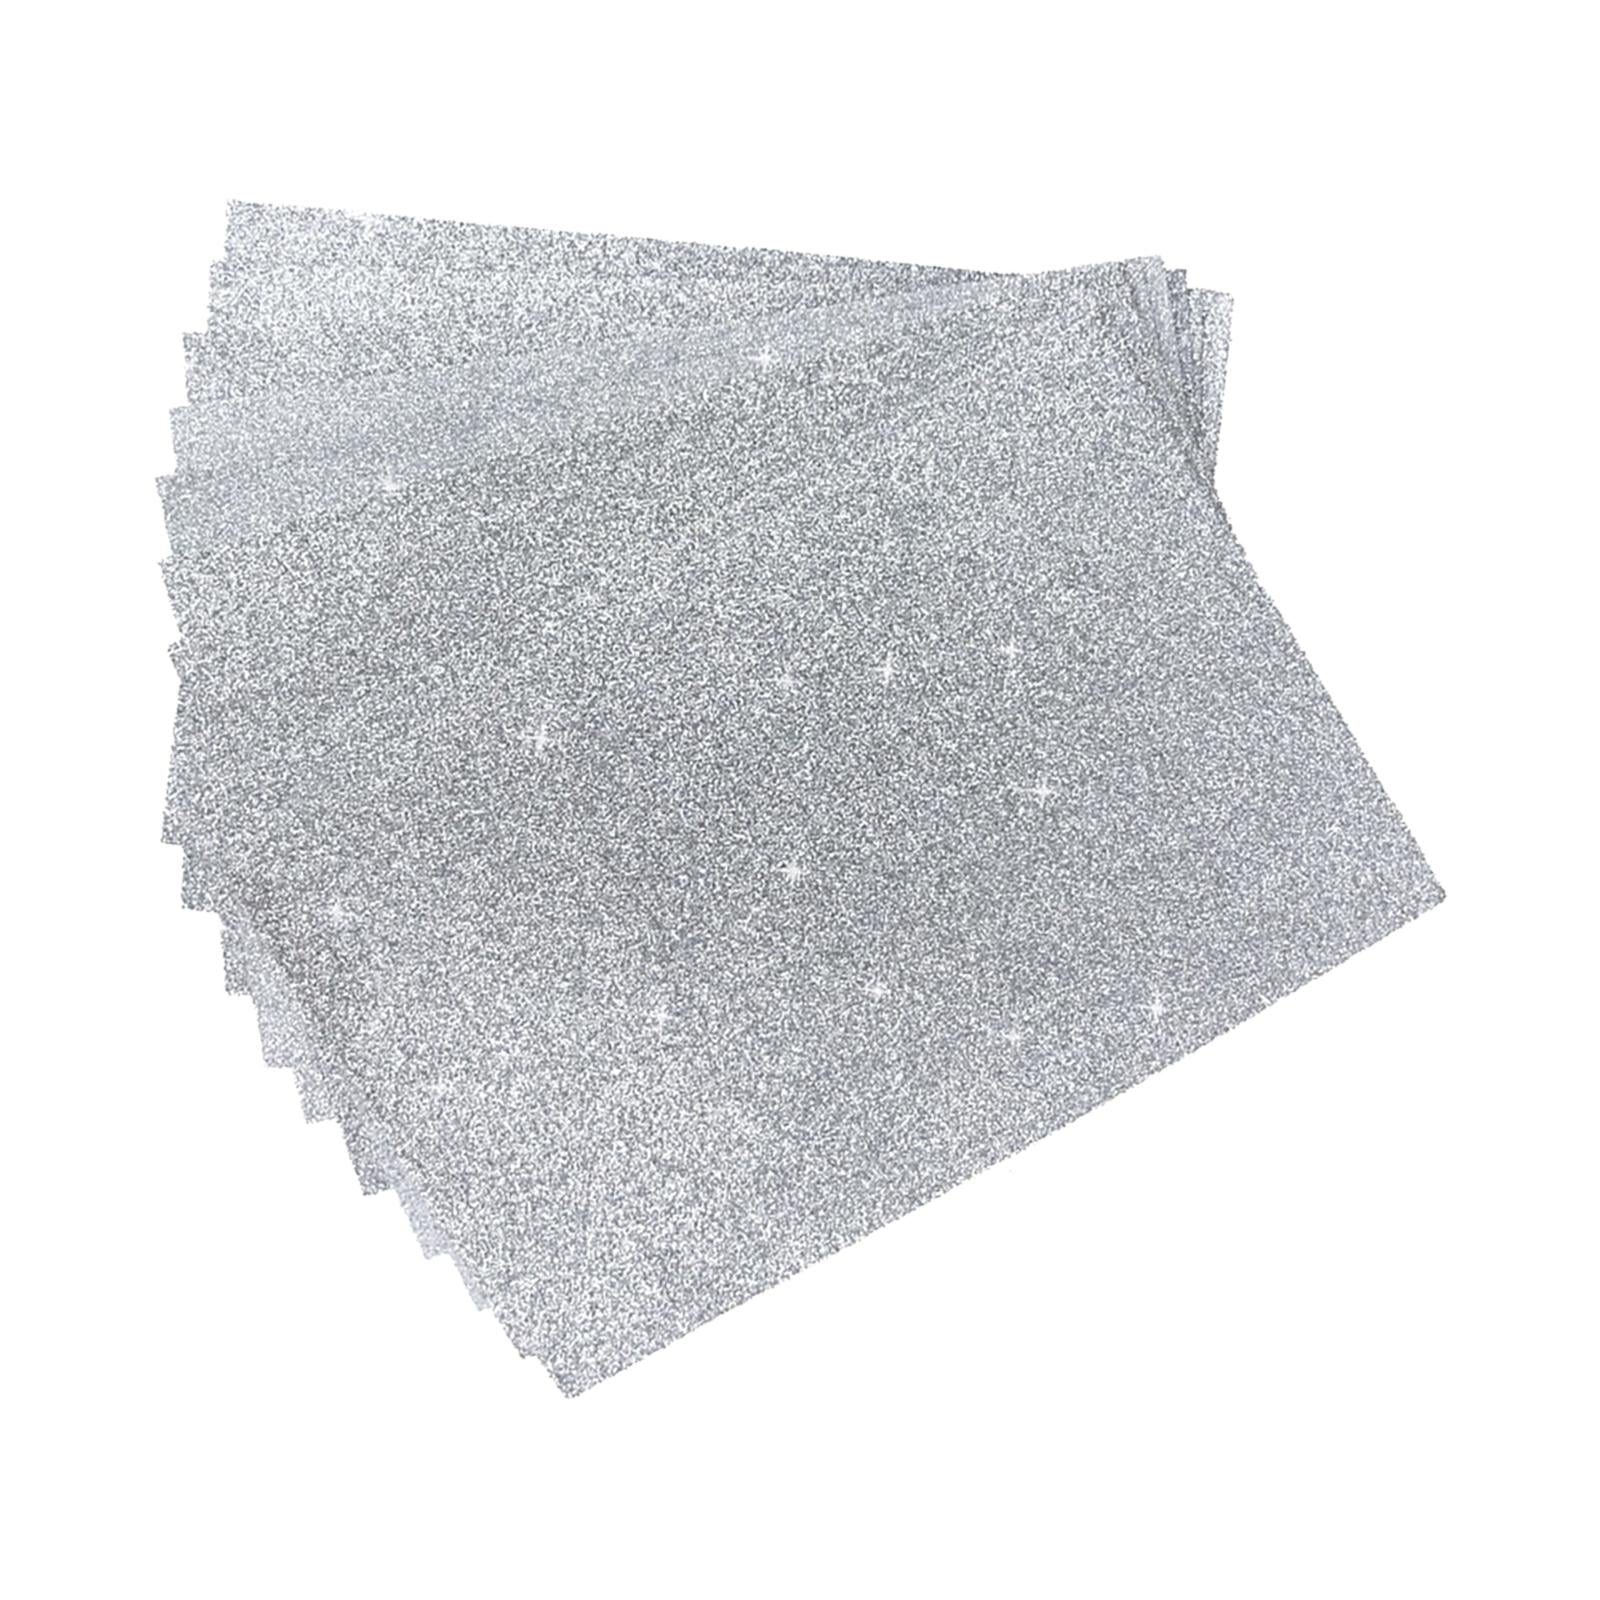 Glitter Sponge Paper Cardstock Scrapbooking for Collages Birthday Decor Silver